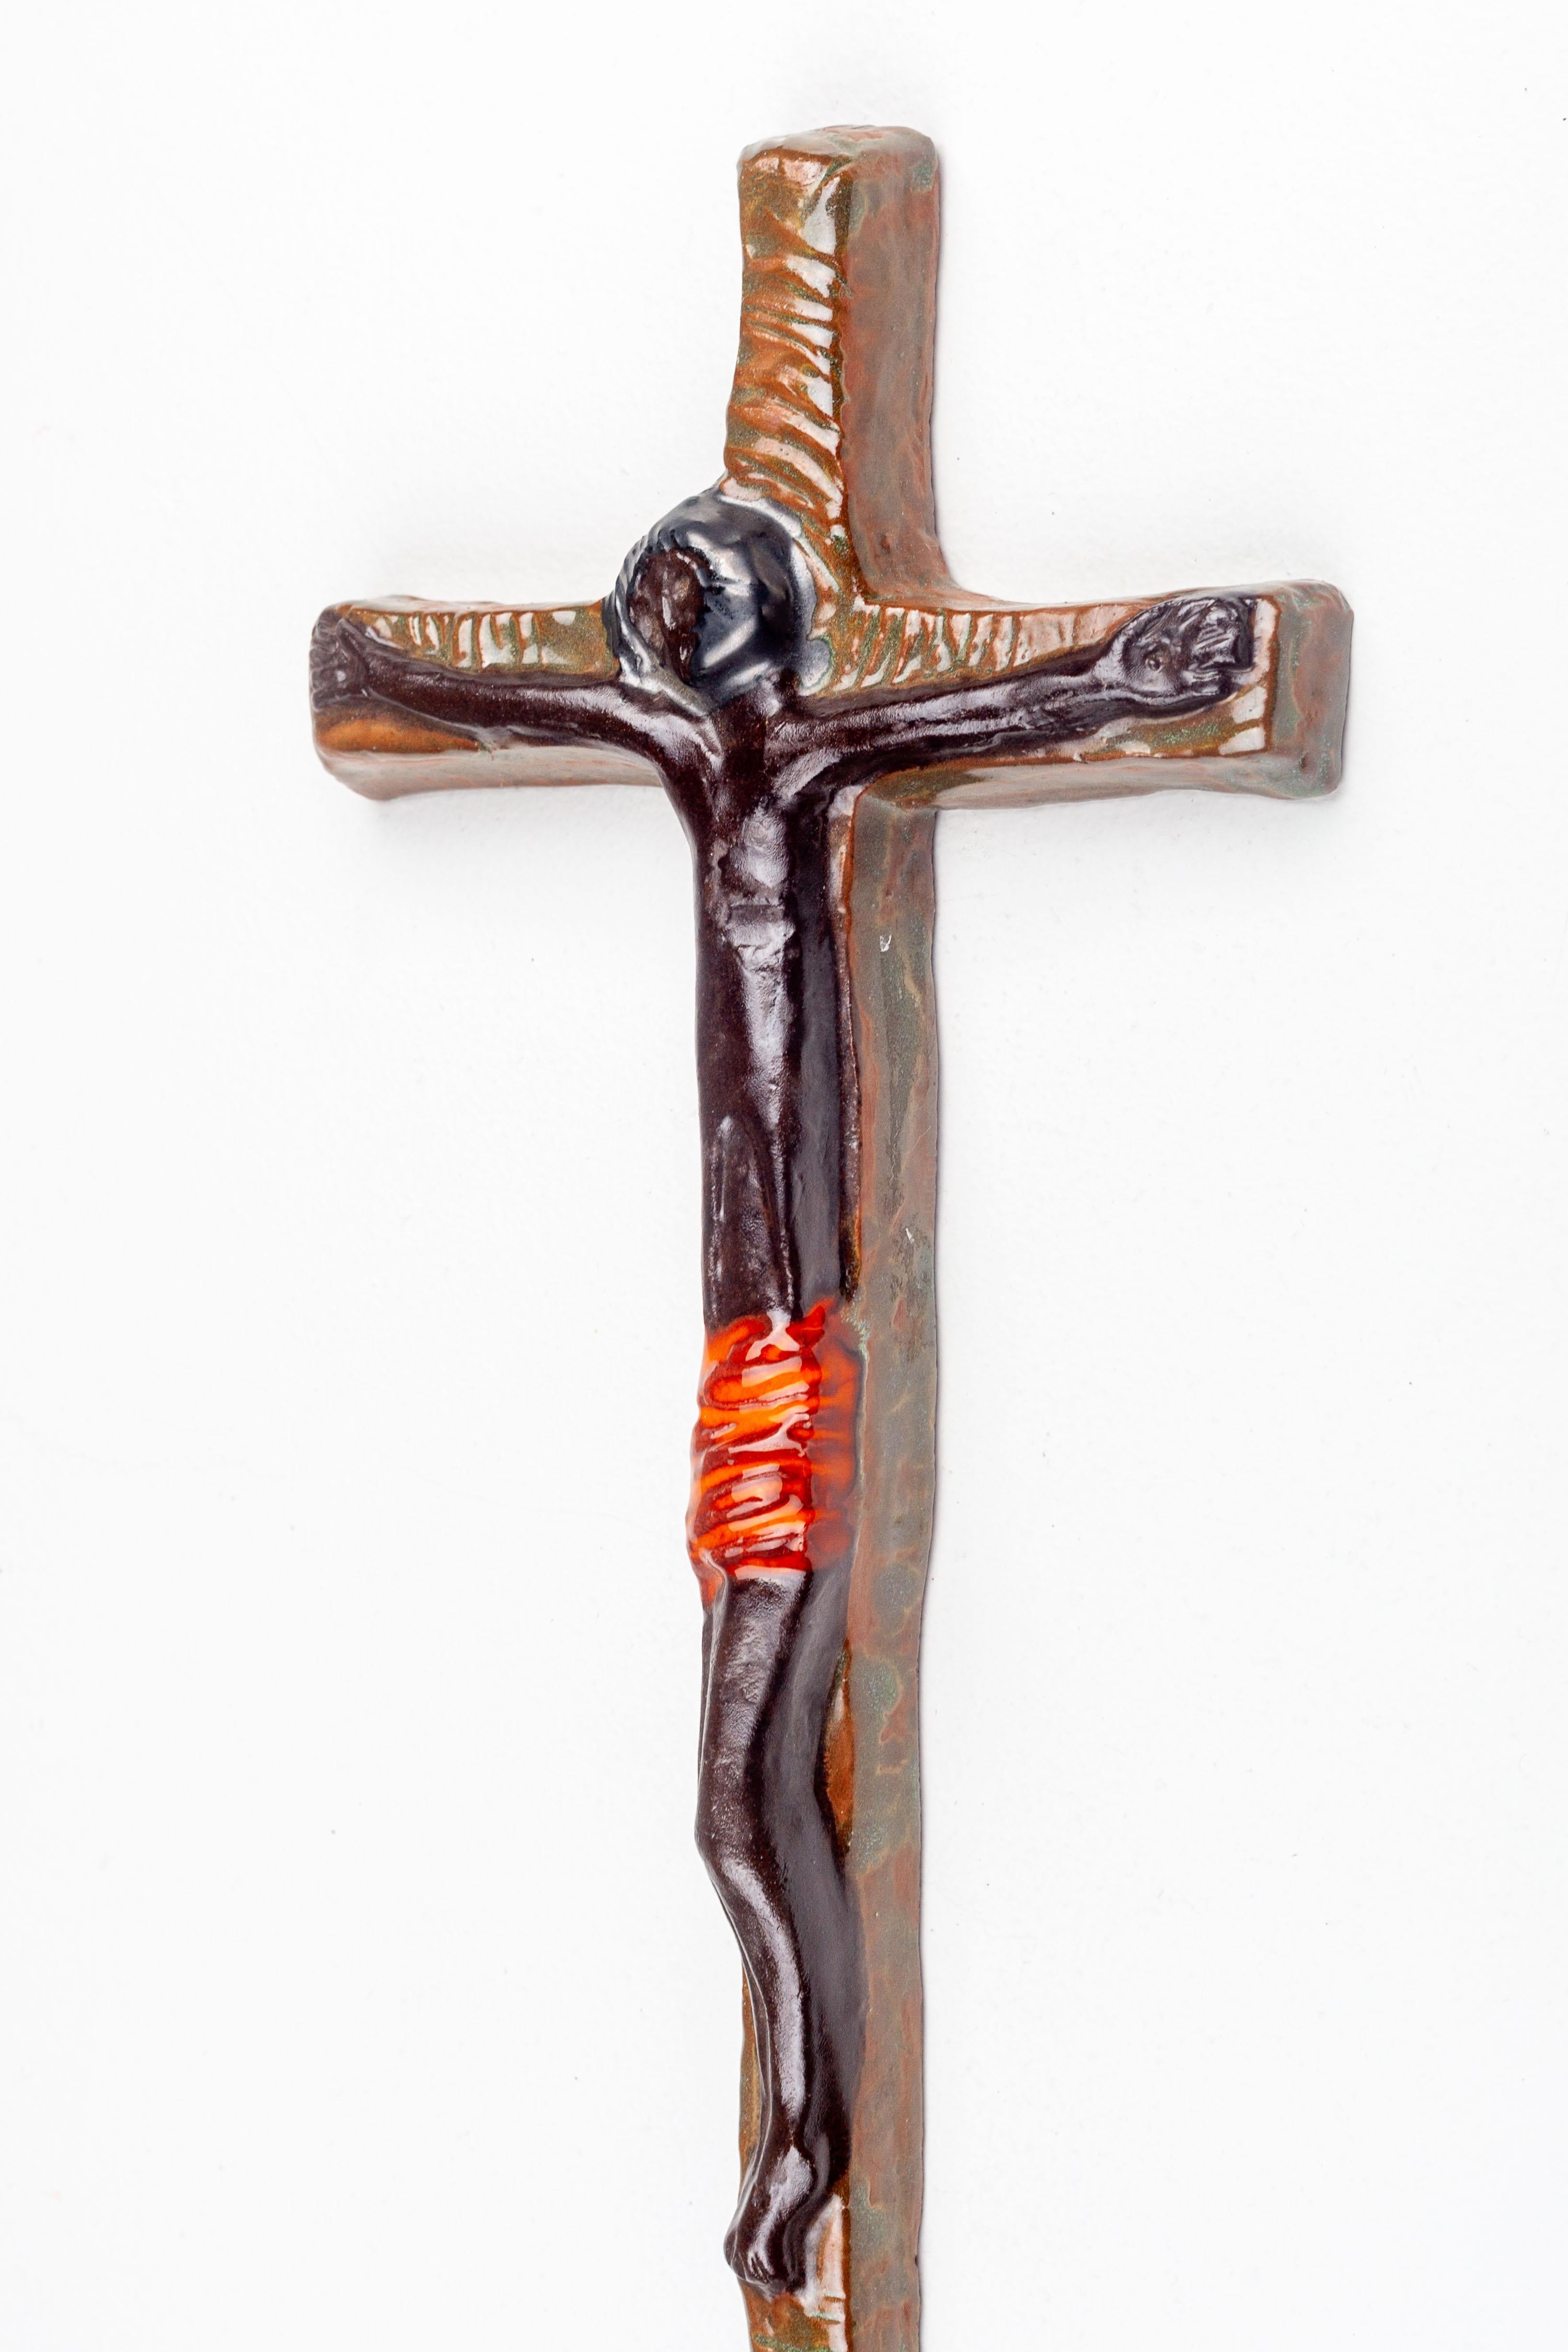 This evocative piece of mid-century modern religious art represents a fusion of traditional iconography with the abstract, minimalist sensibilities of the period. Handcrafted by a European studio artist, the ceramic cross showcases a distinctive